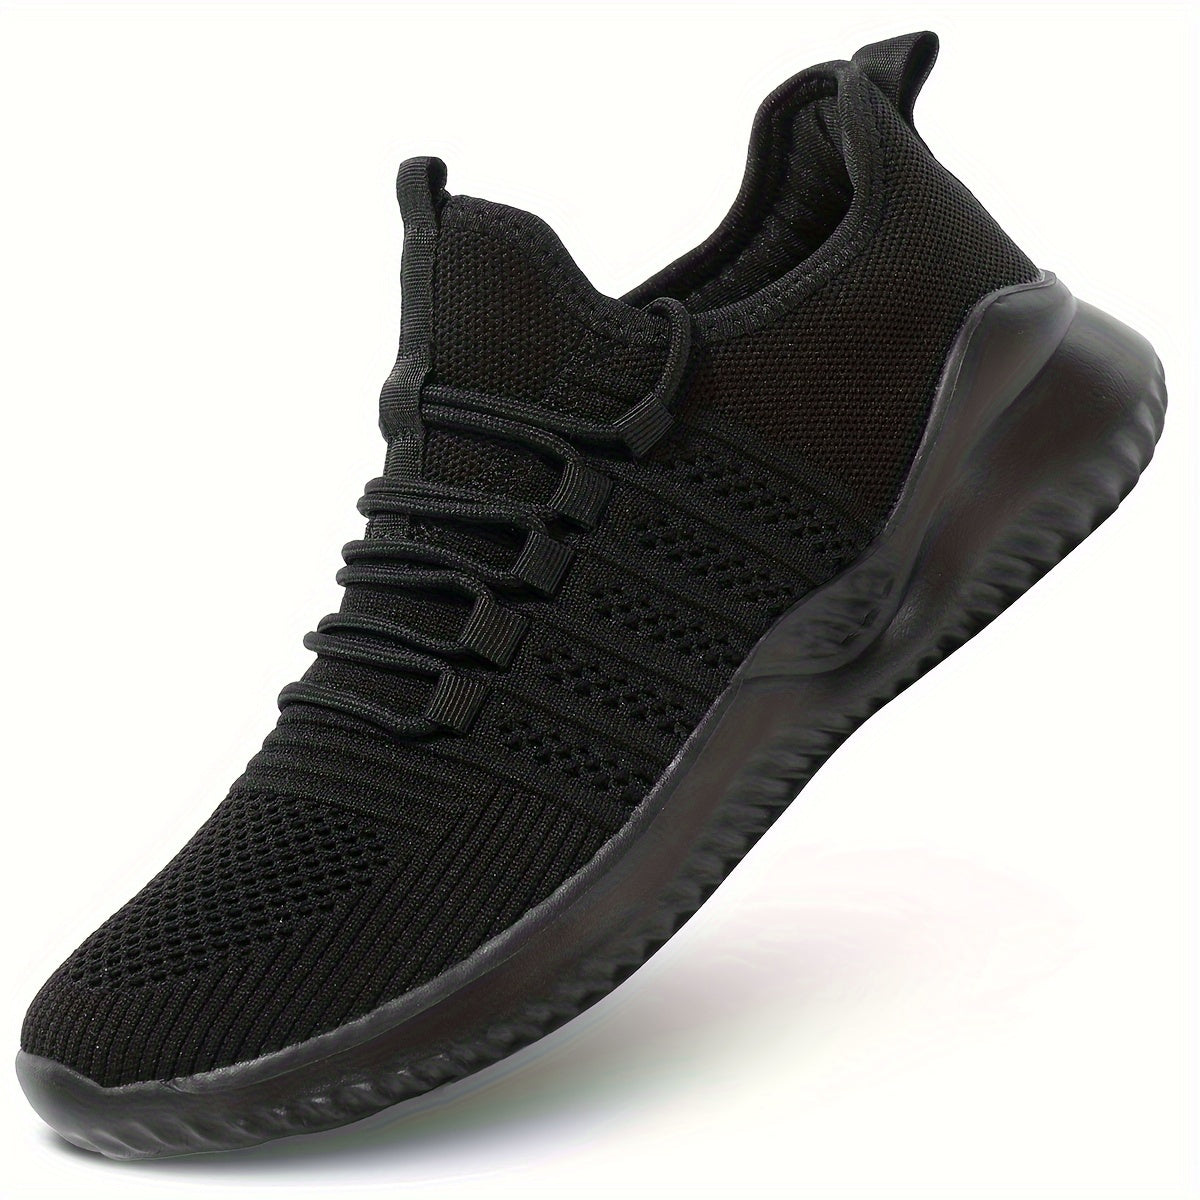 Men's Casual Sneakers, Breathable Lace-up Shoes With Fabric Uppers For Outdoor Walking Running, Spring Summer Autumn